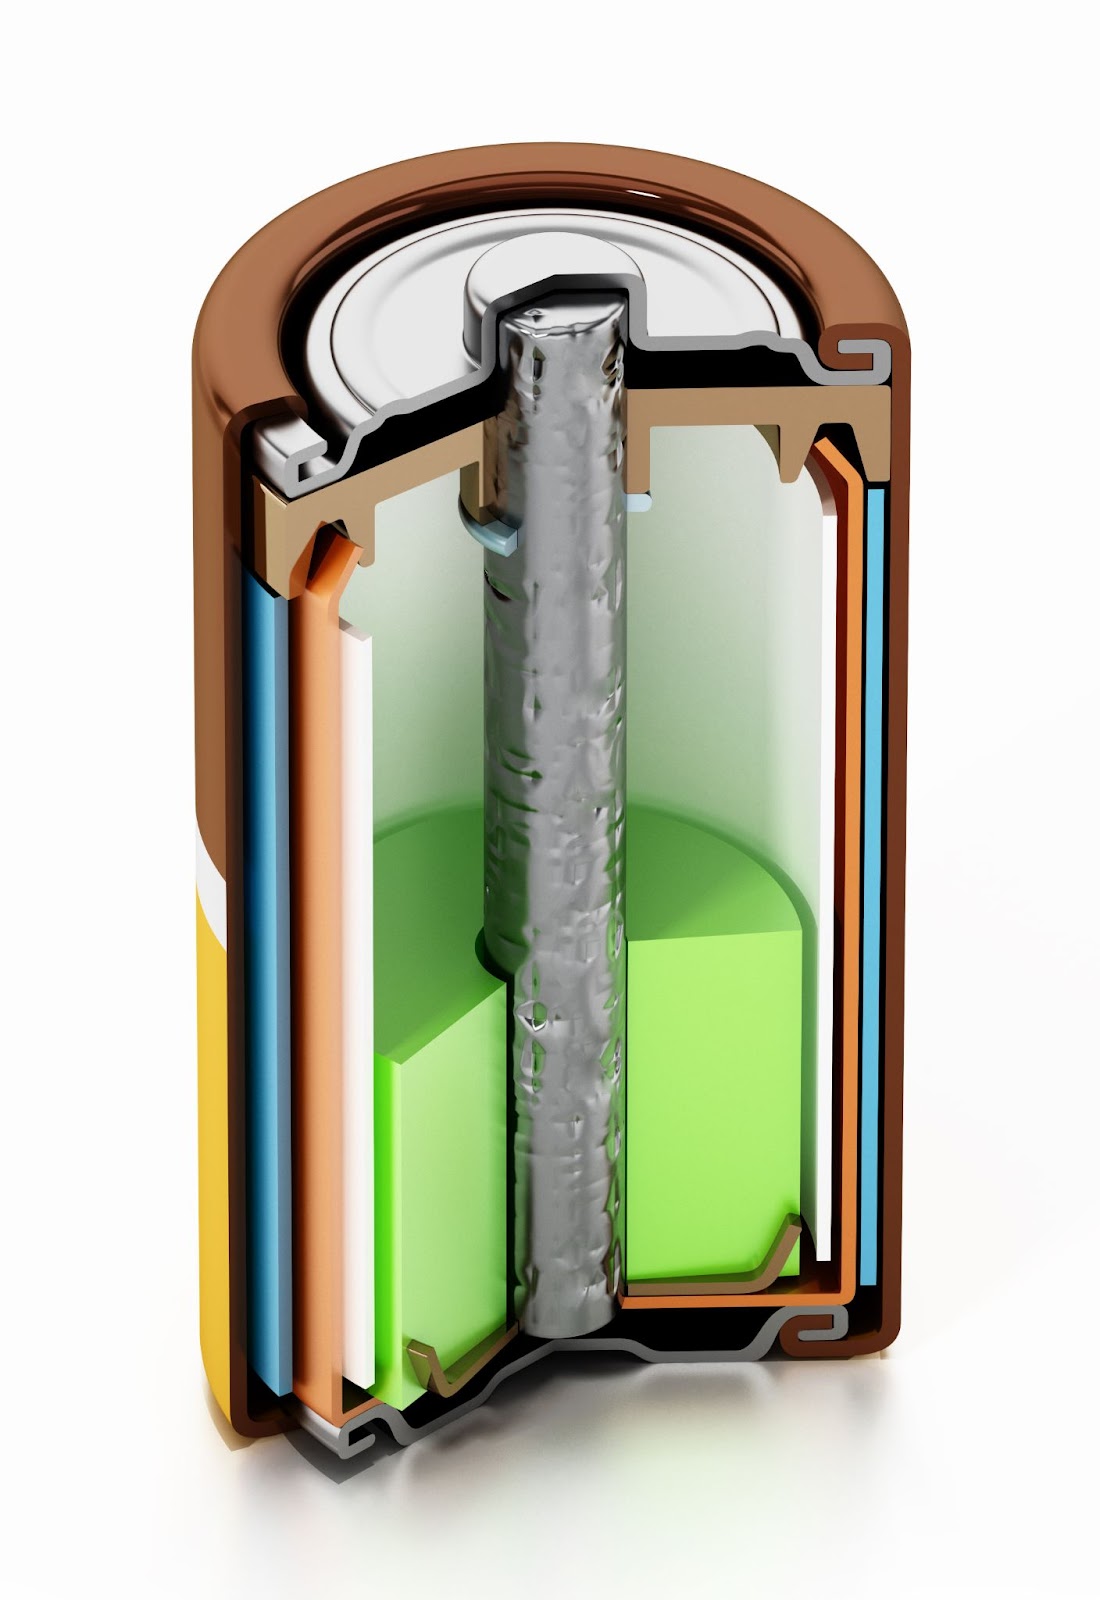 Battery cross-section. Image used courtesy of Adobe Stock